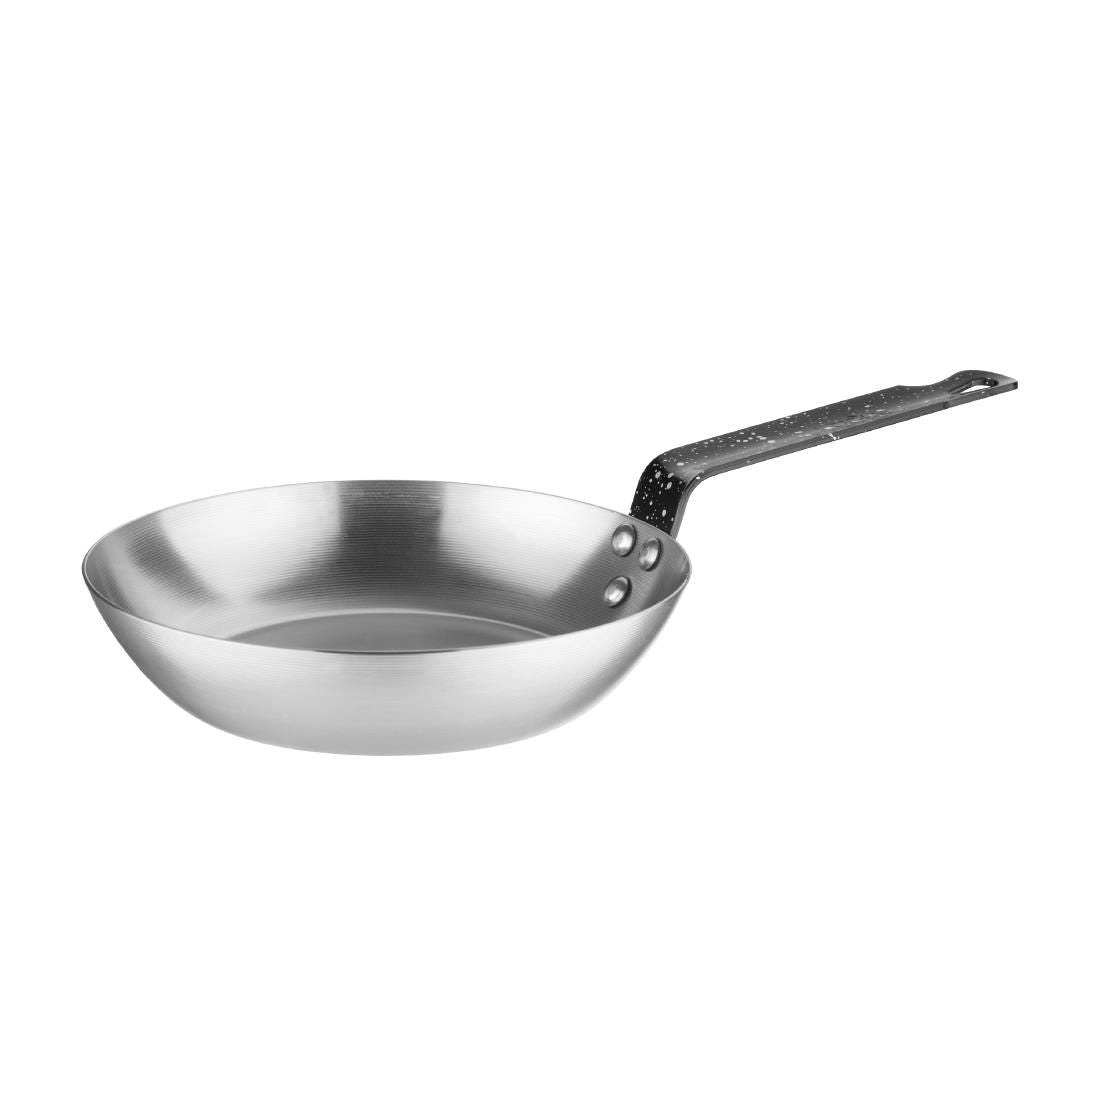 GD063 Vogue Carbon Steel Frying Pan 200mm JD Catering Equipment Solutions Ltd